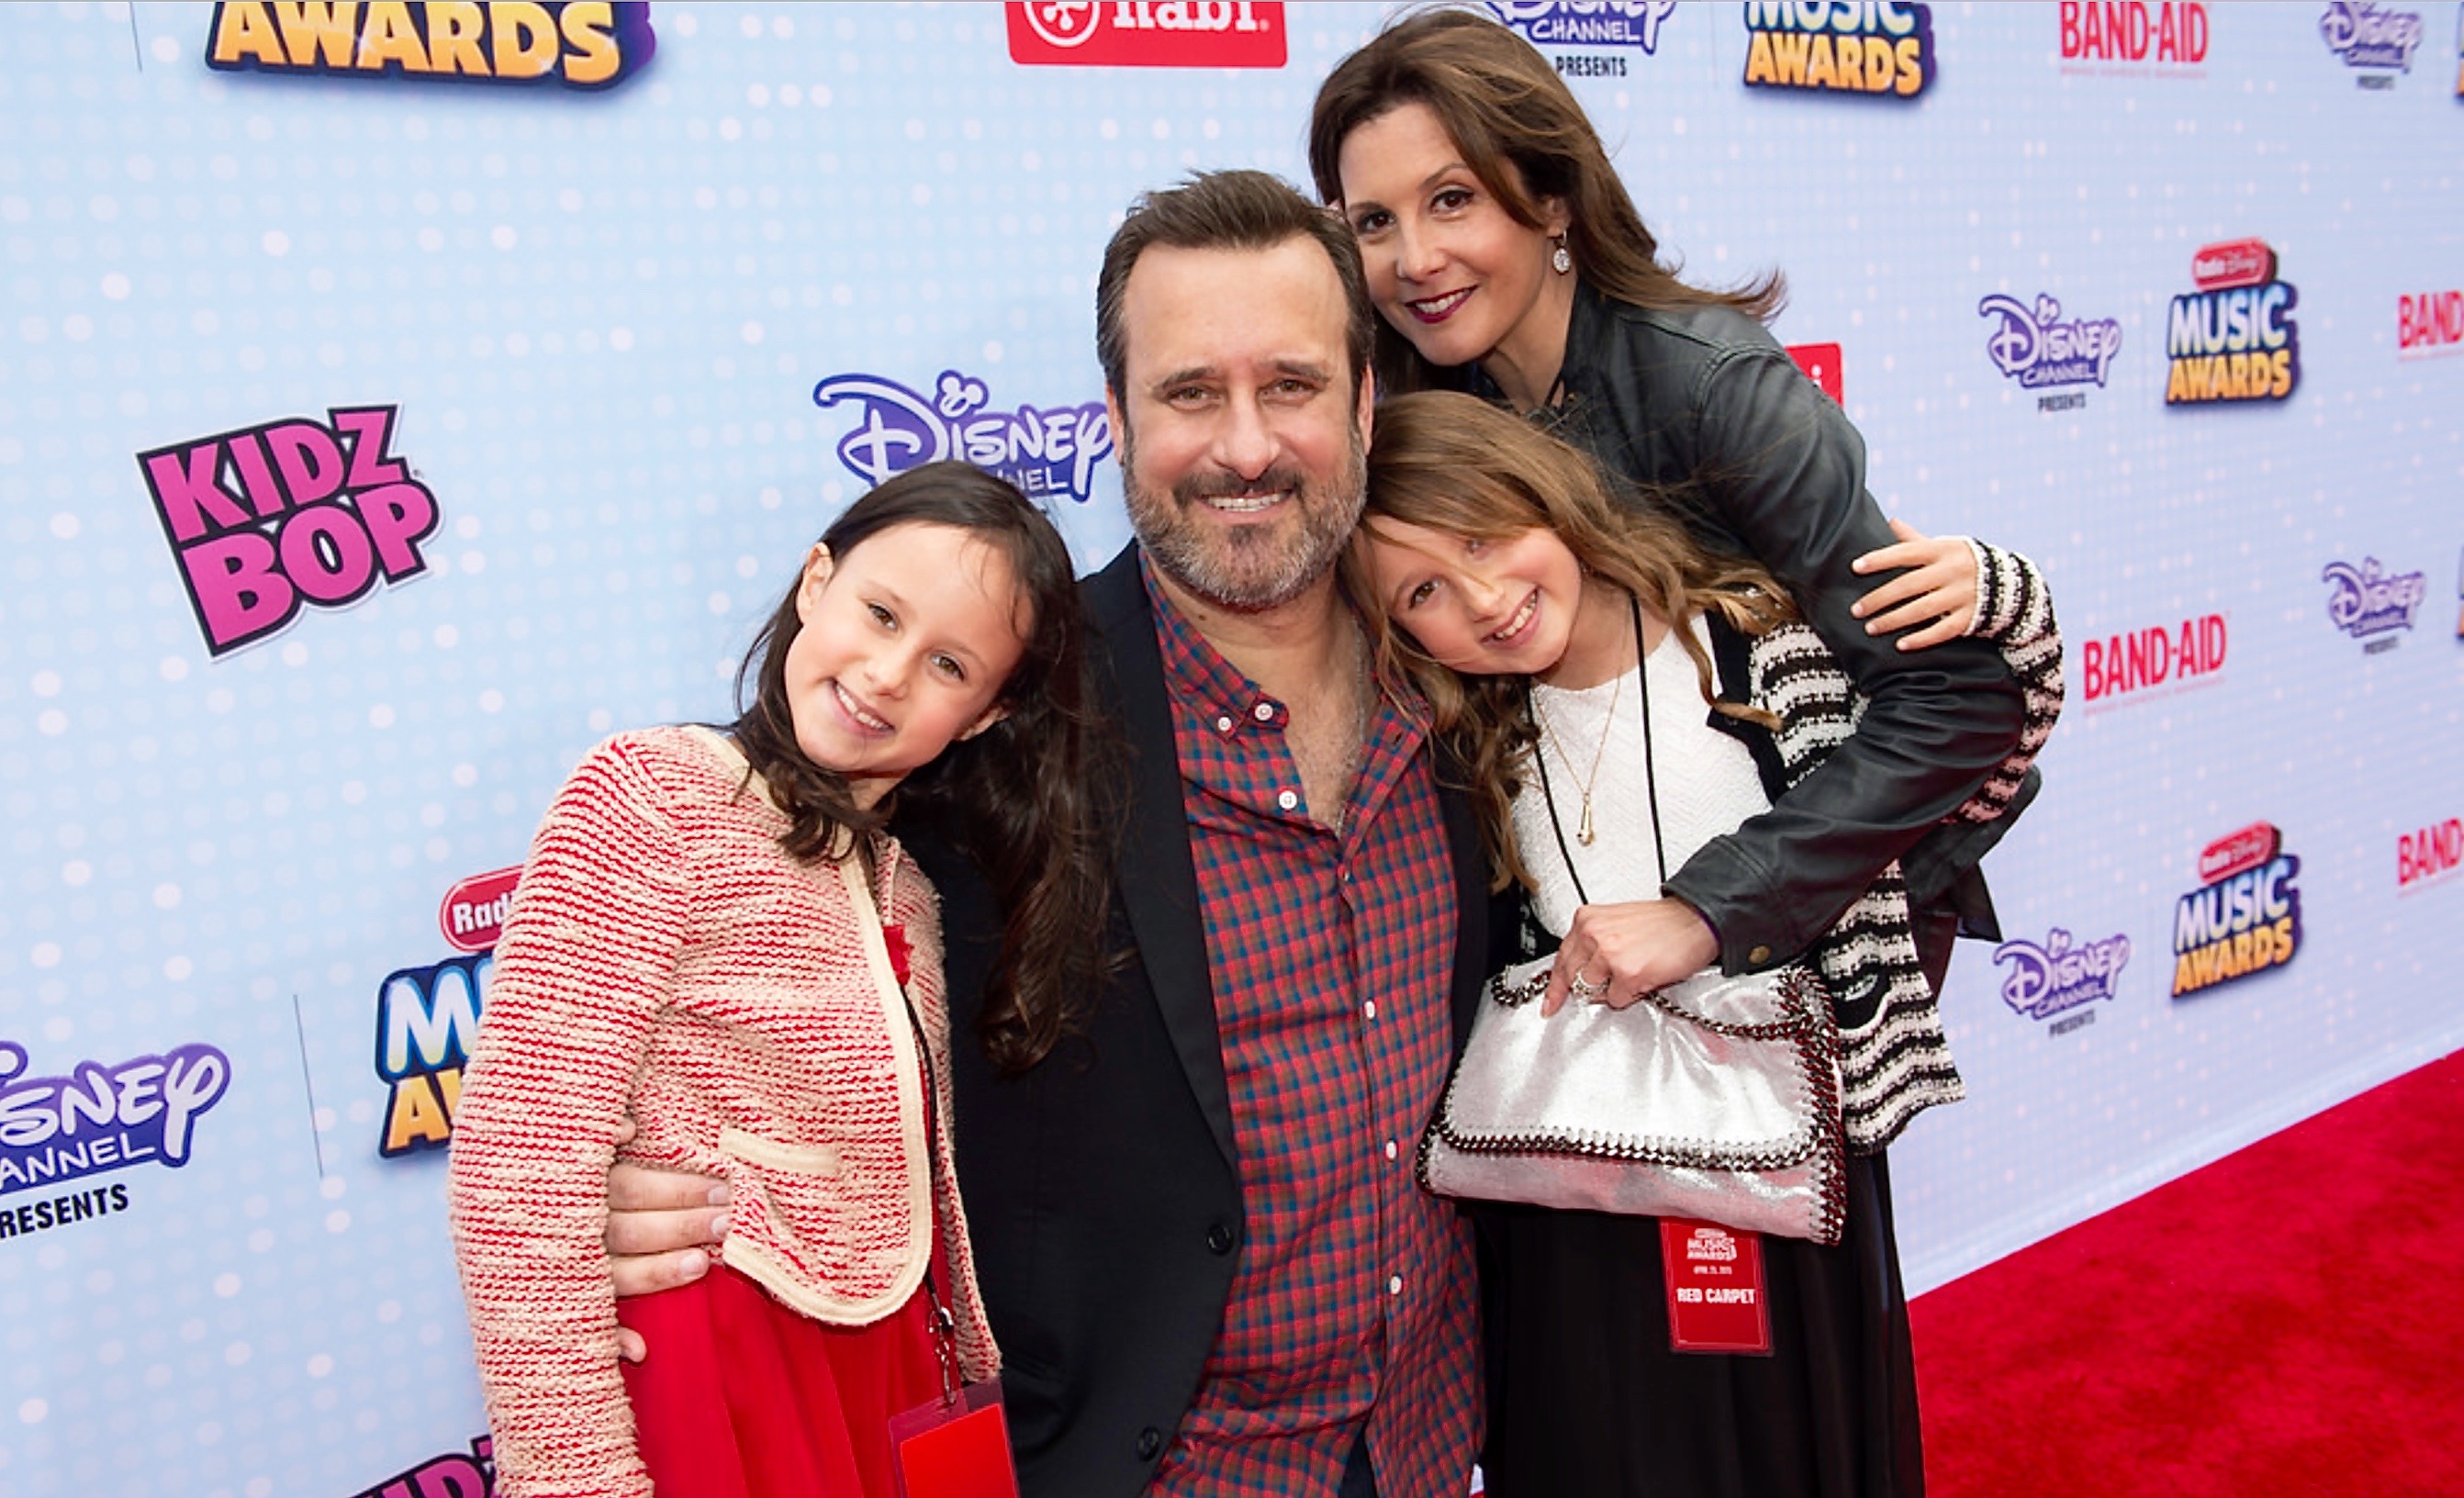 Benjamin King with wife, Laura King, and daughters, at the 2015 Radio Disney Music Awards at the Nokia Theater